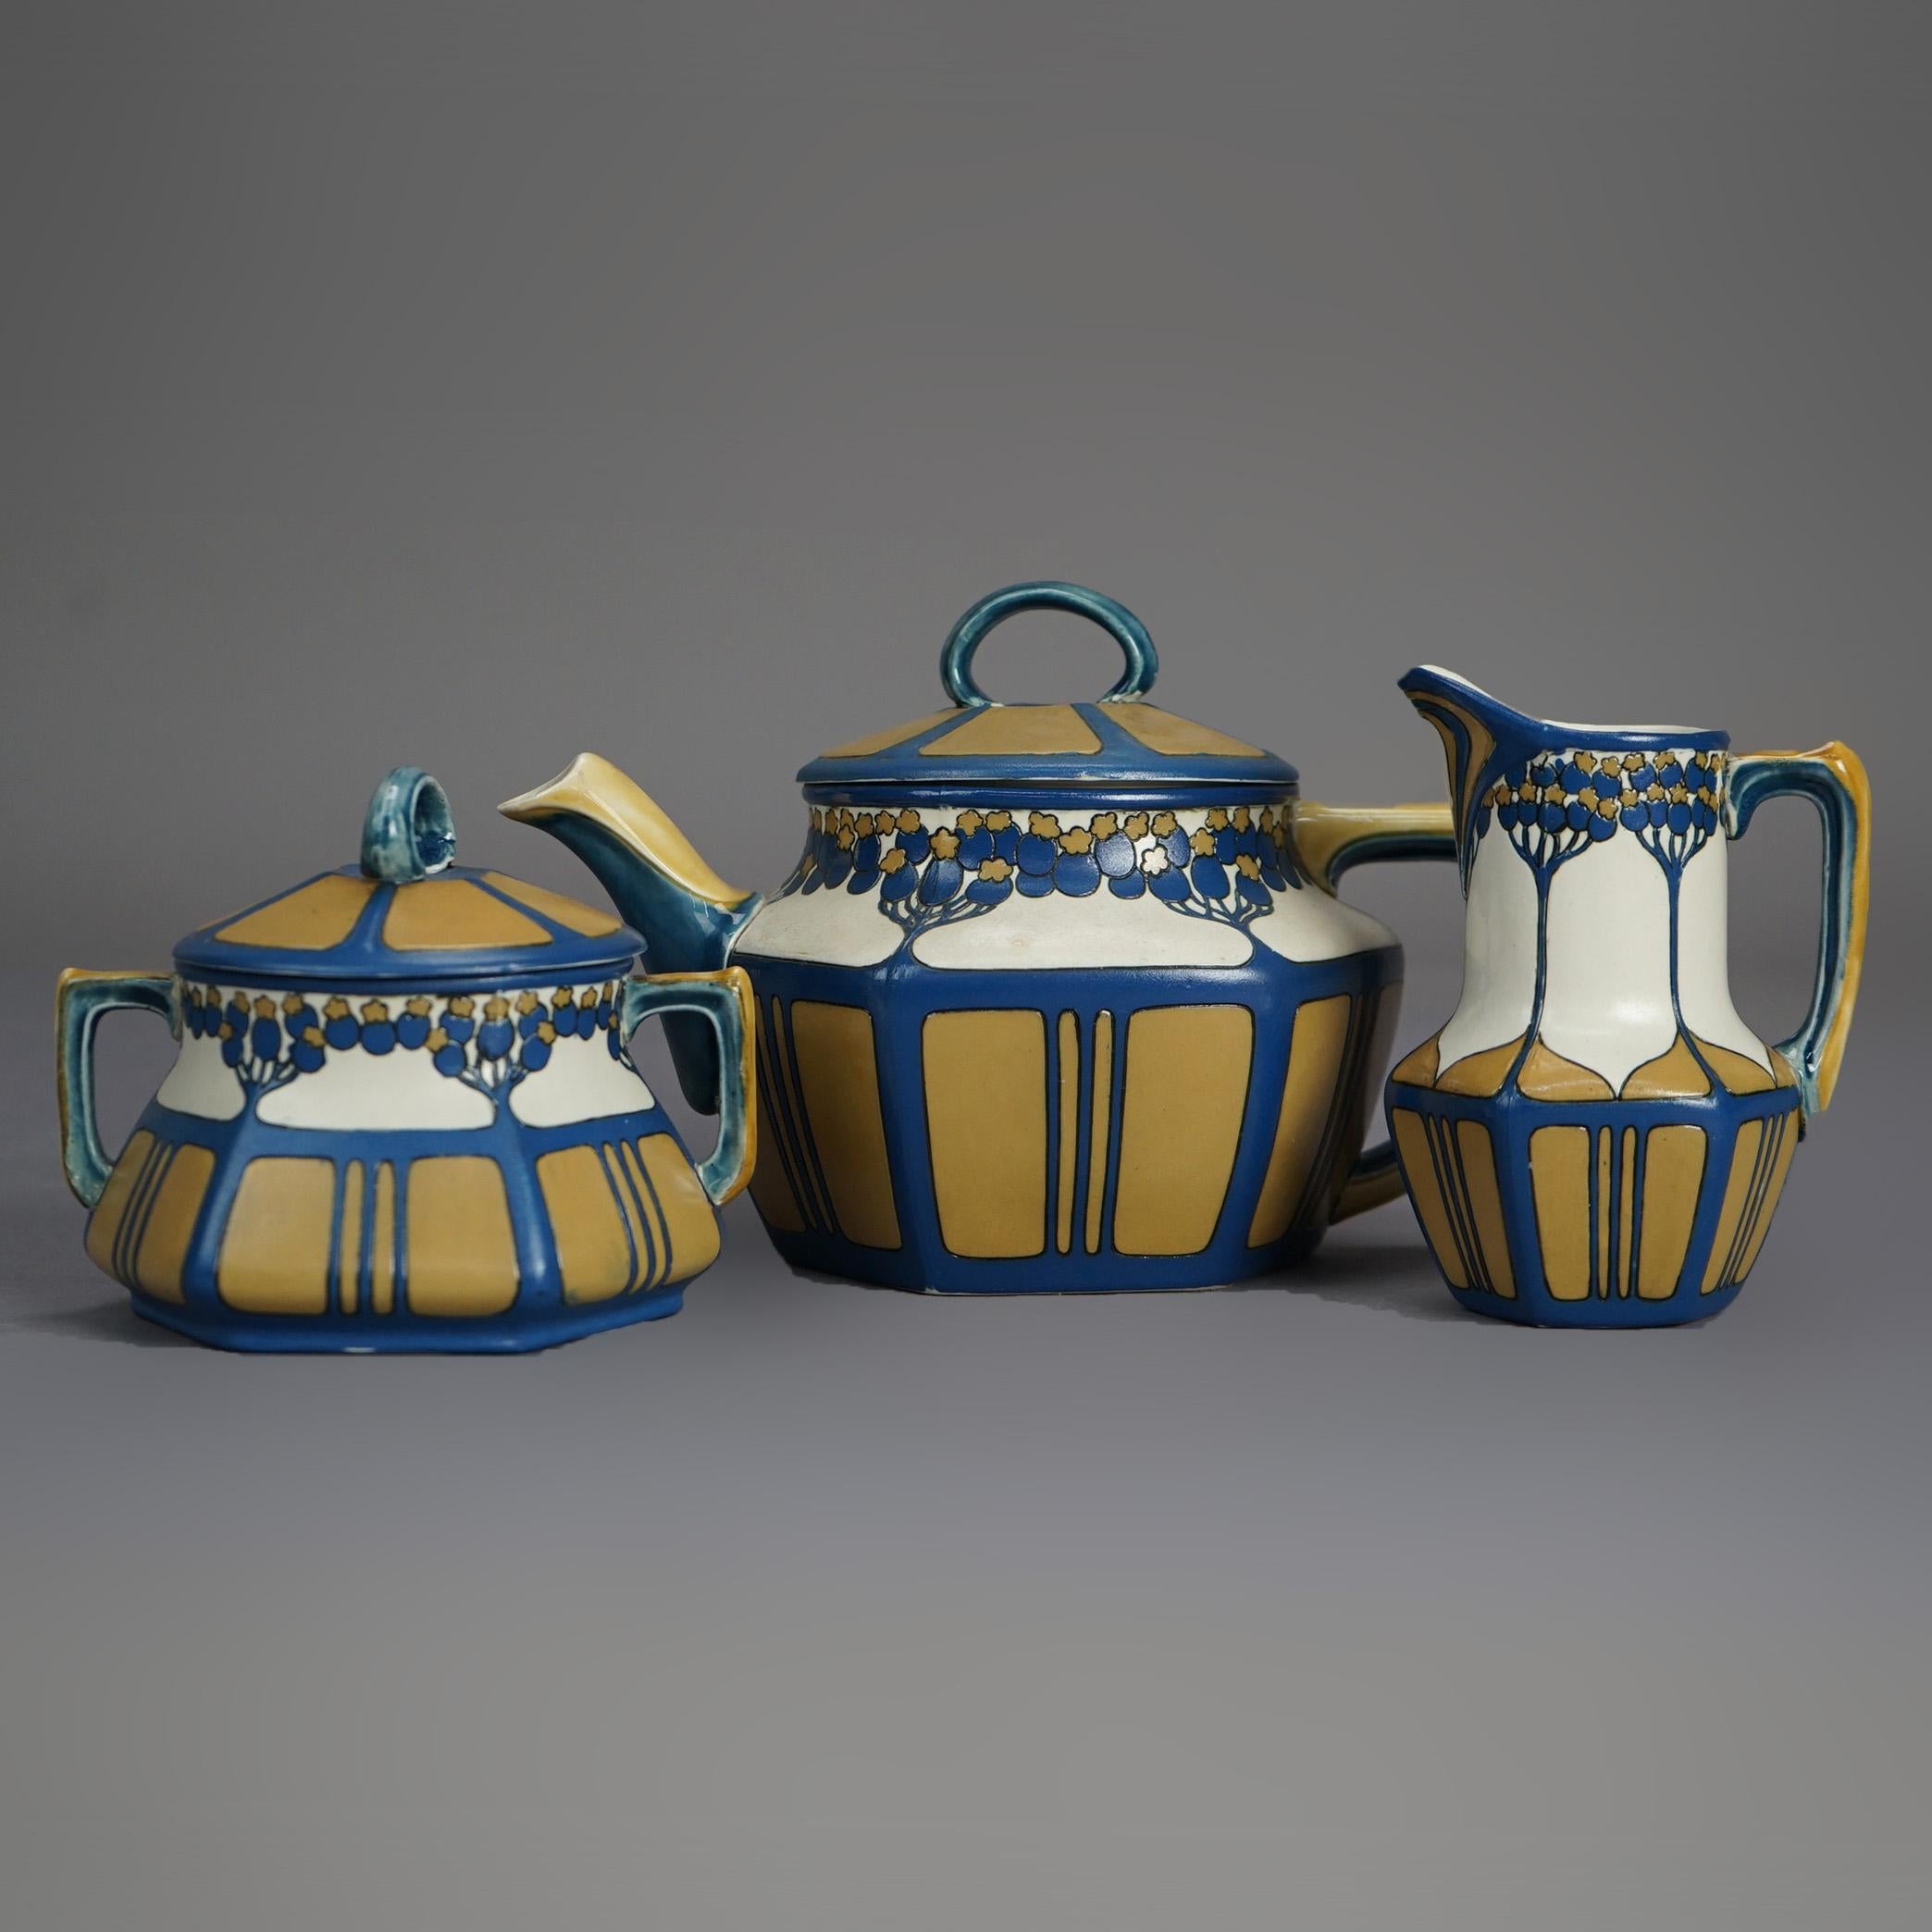 An antique Arts & Crafts German Mettlach pottery tea set in faceted form with hand painted tree design; set includes tea pot, covered sugar and creamer; signed on bases as photographed; 20th century.

Measures- Pitcher: 4.75''H x 2.75''W x 3.25''D;